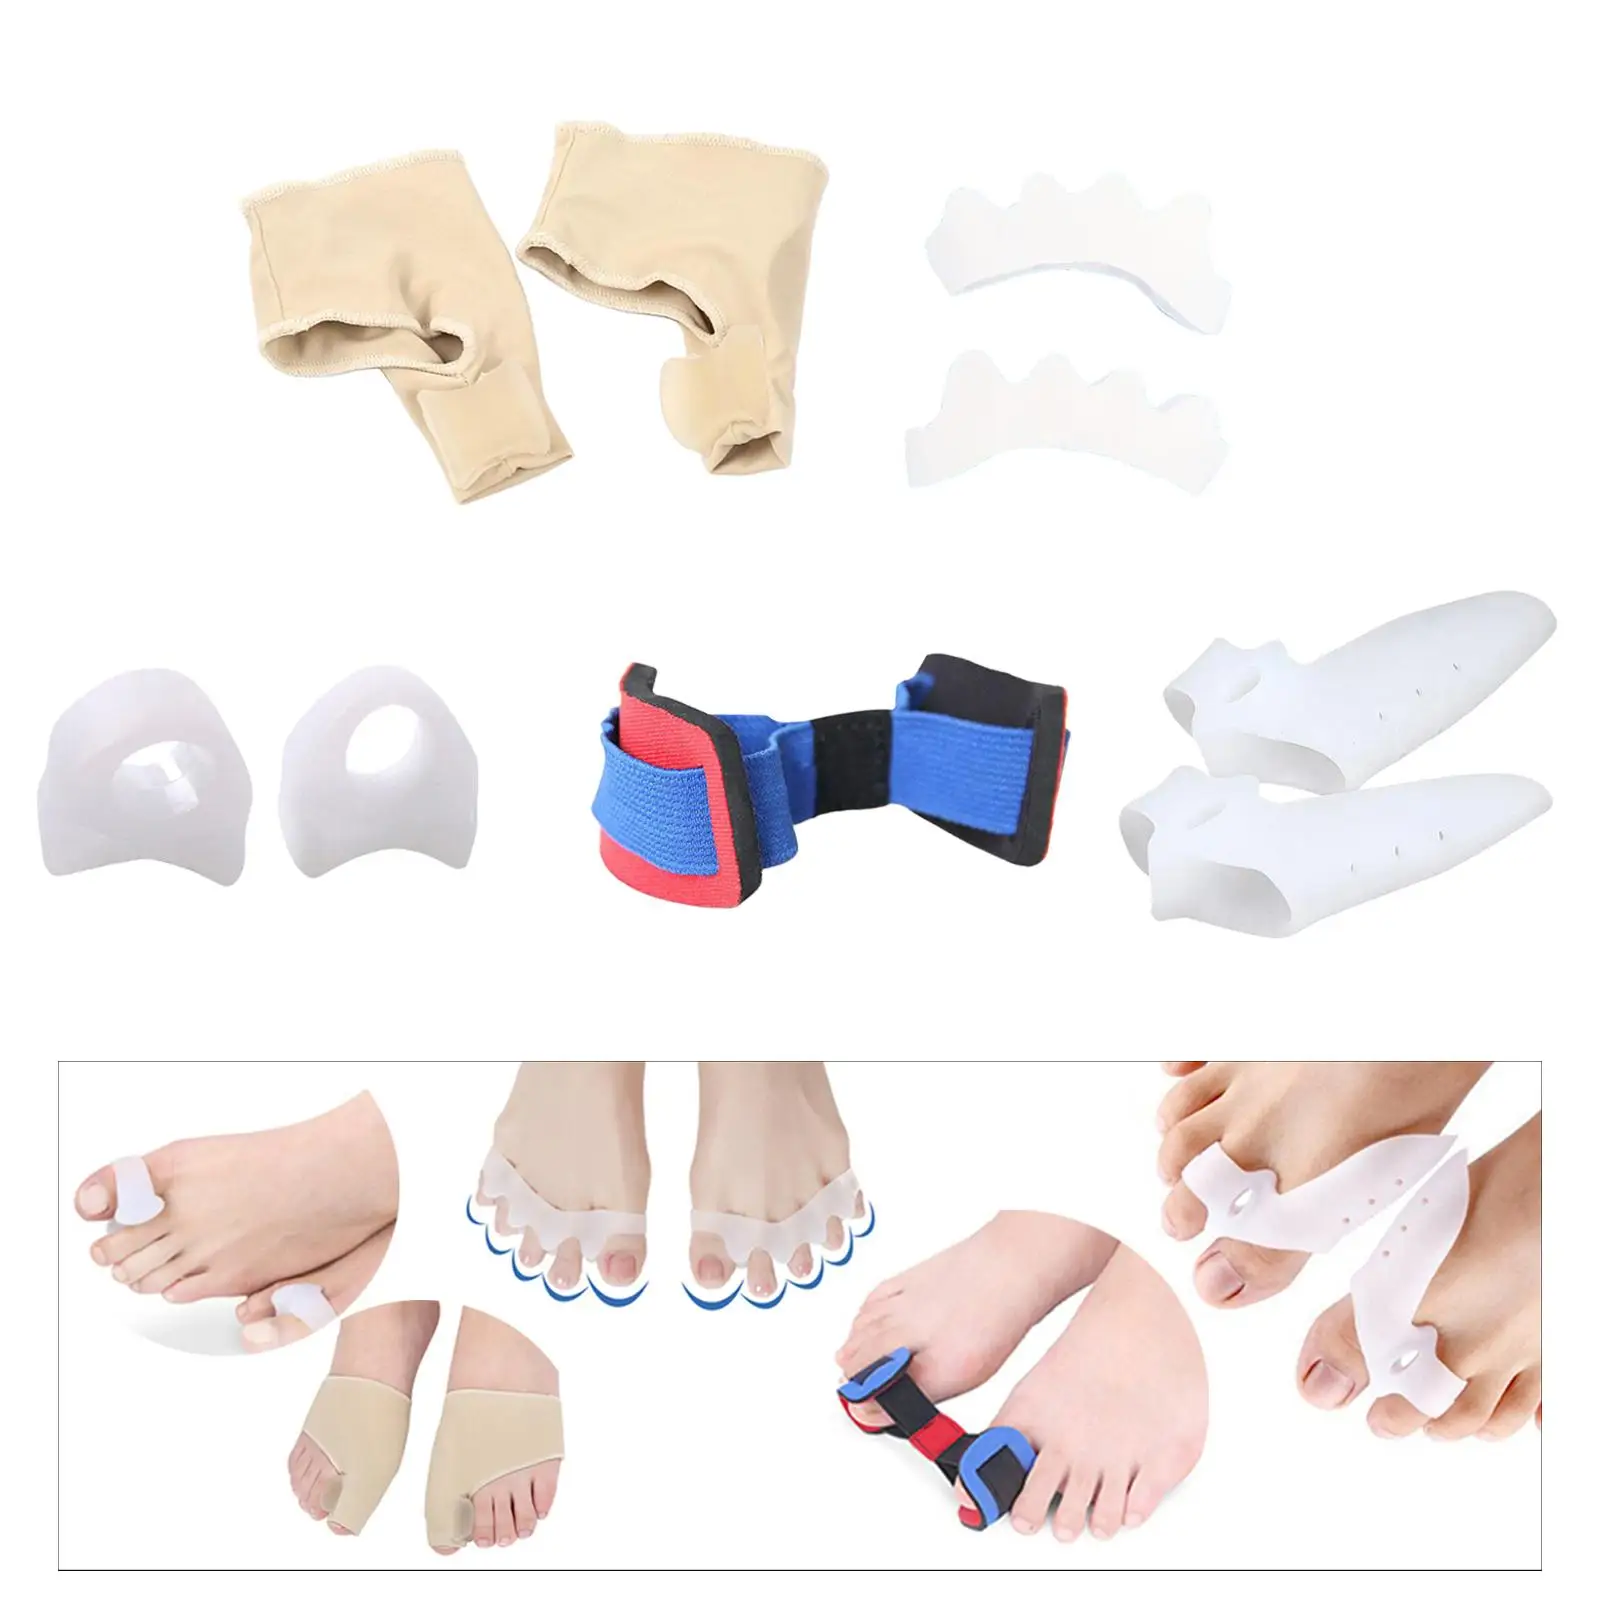 Bunion Corrector Bunion Relief Sleeves Kit, Safe and Soft , Reduce Pressure and Friction Between Toes and Shoes Reusable Premium